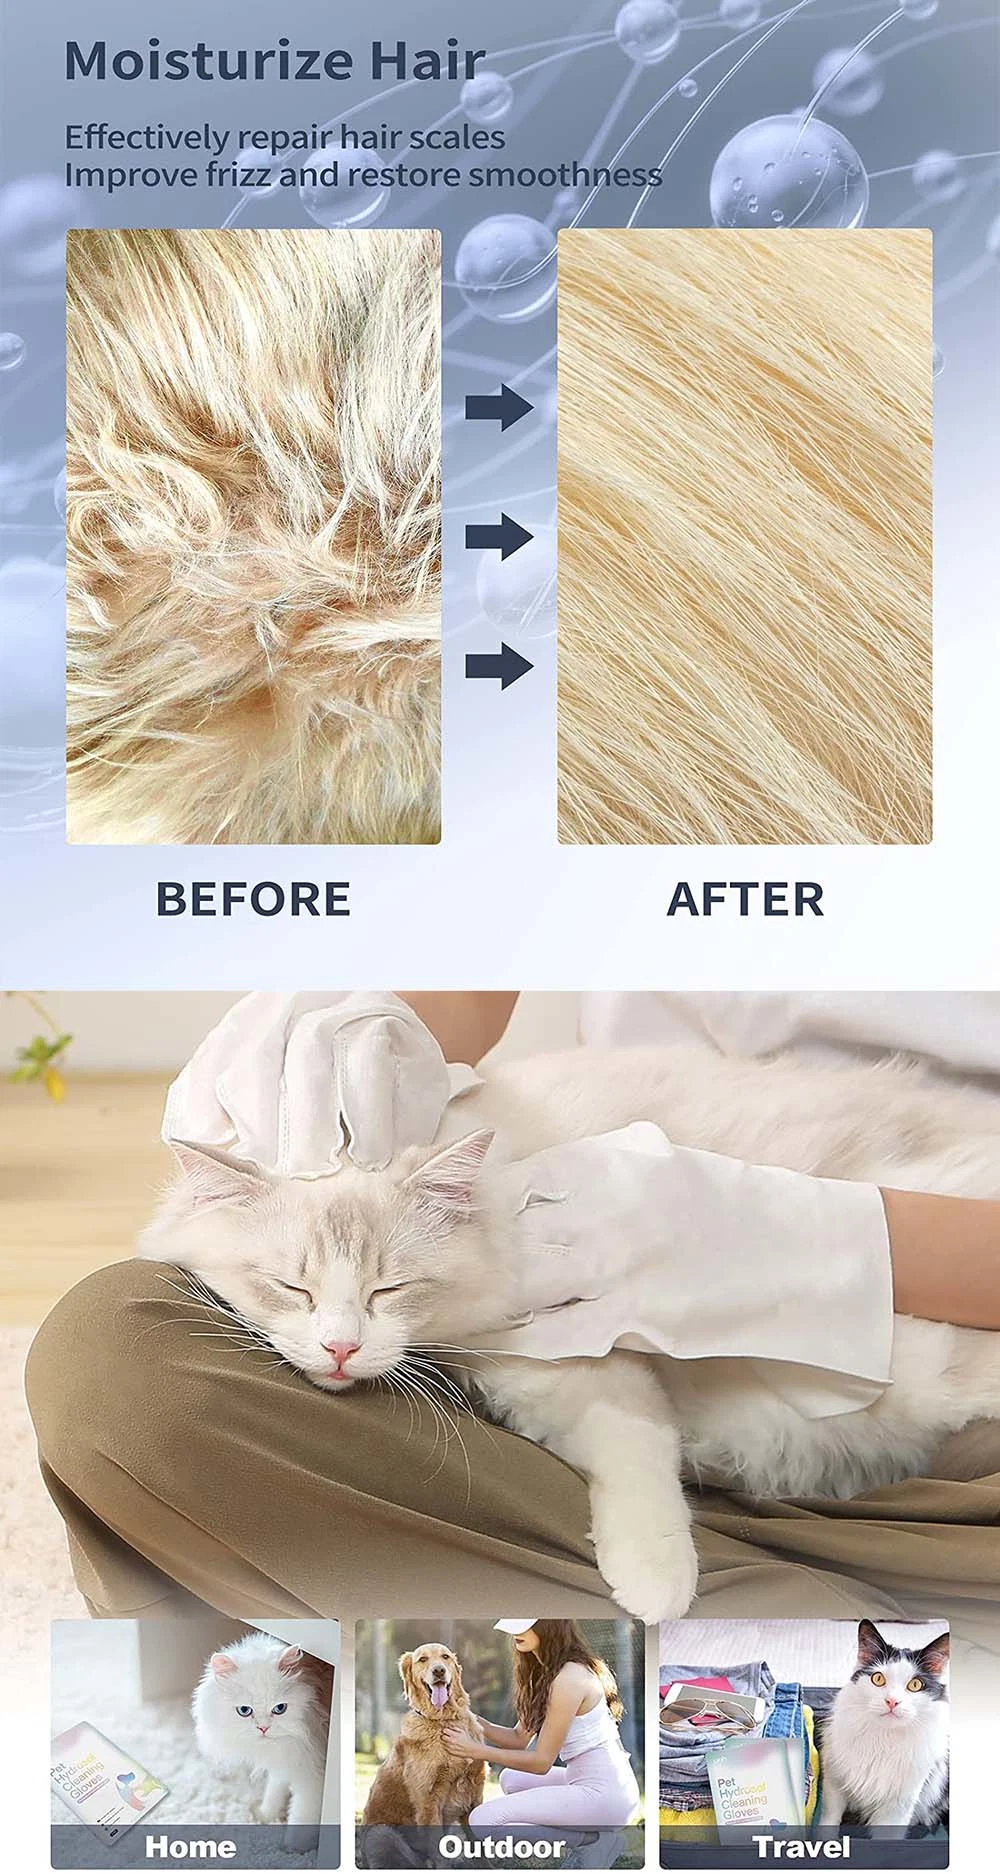 Pet Supplies Customized Water Prince Pet 2-Piece Cat Dog Bath Dry Cleaning Towel Pet Supplies Disposable SPA Wet Towel